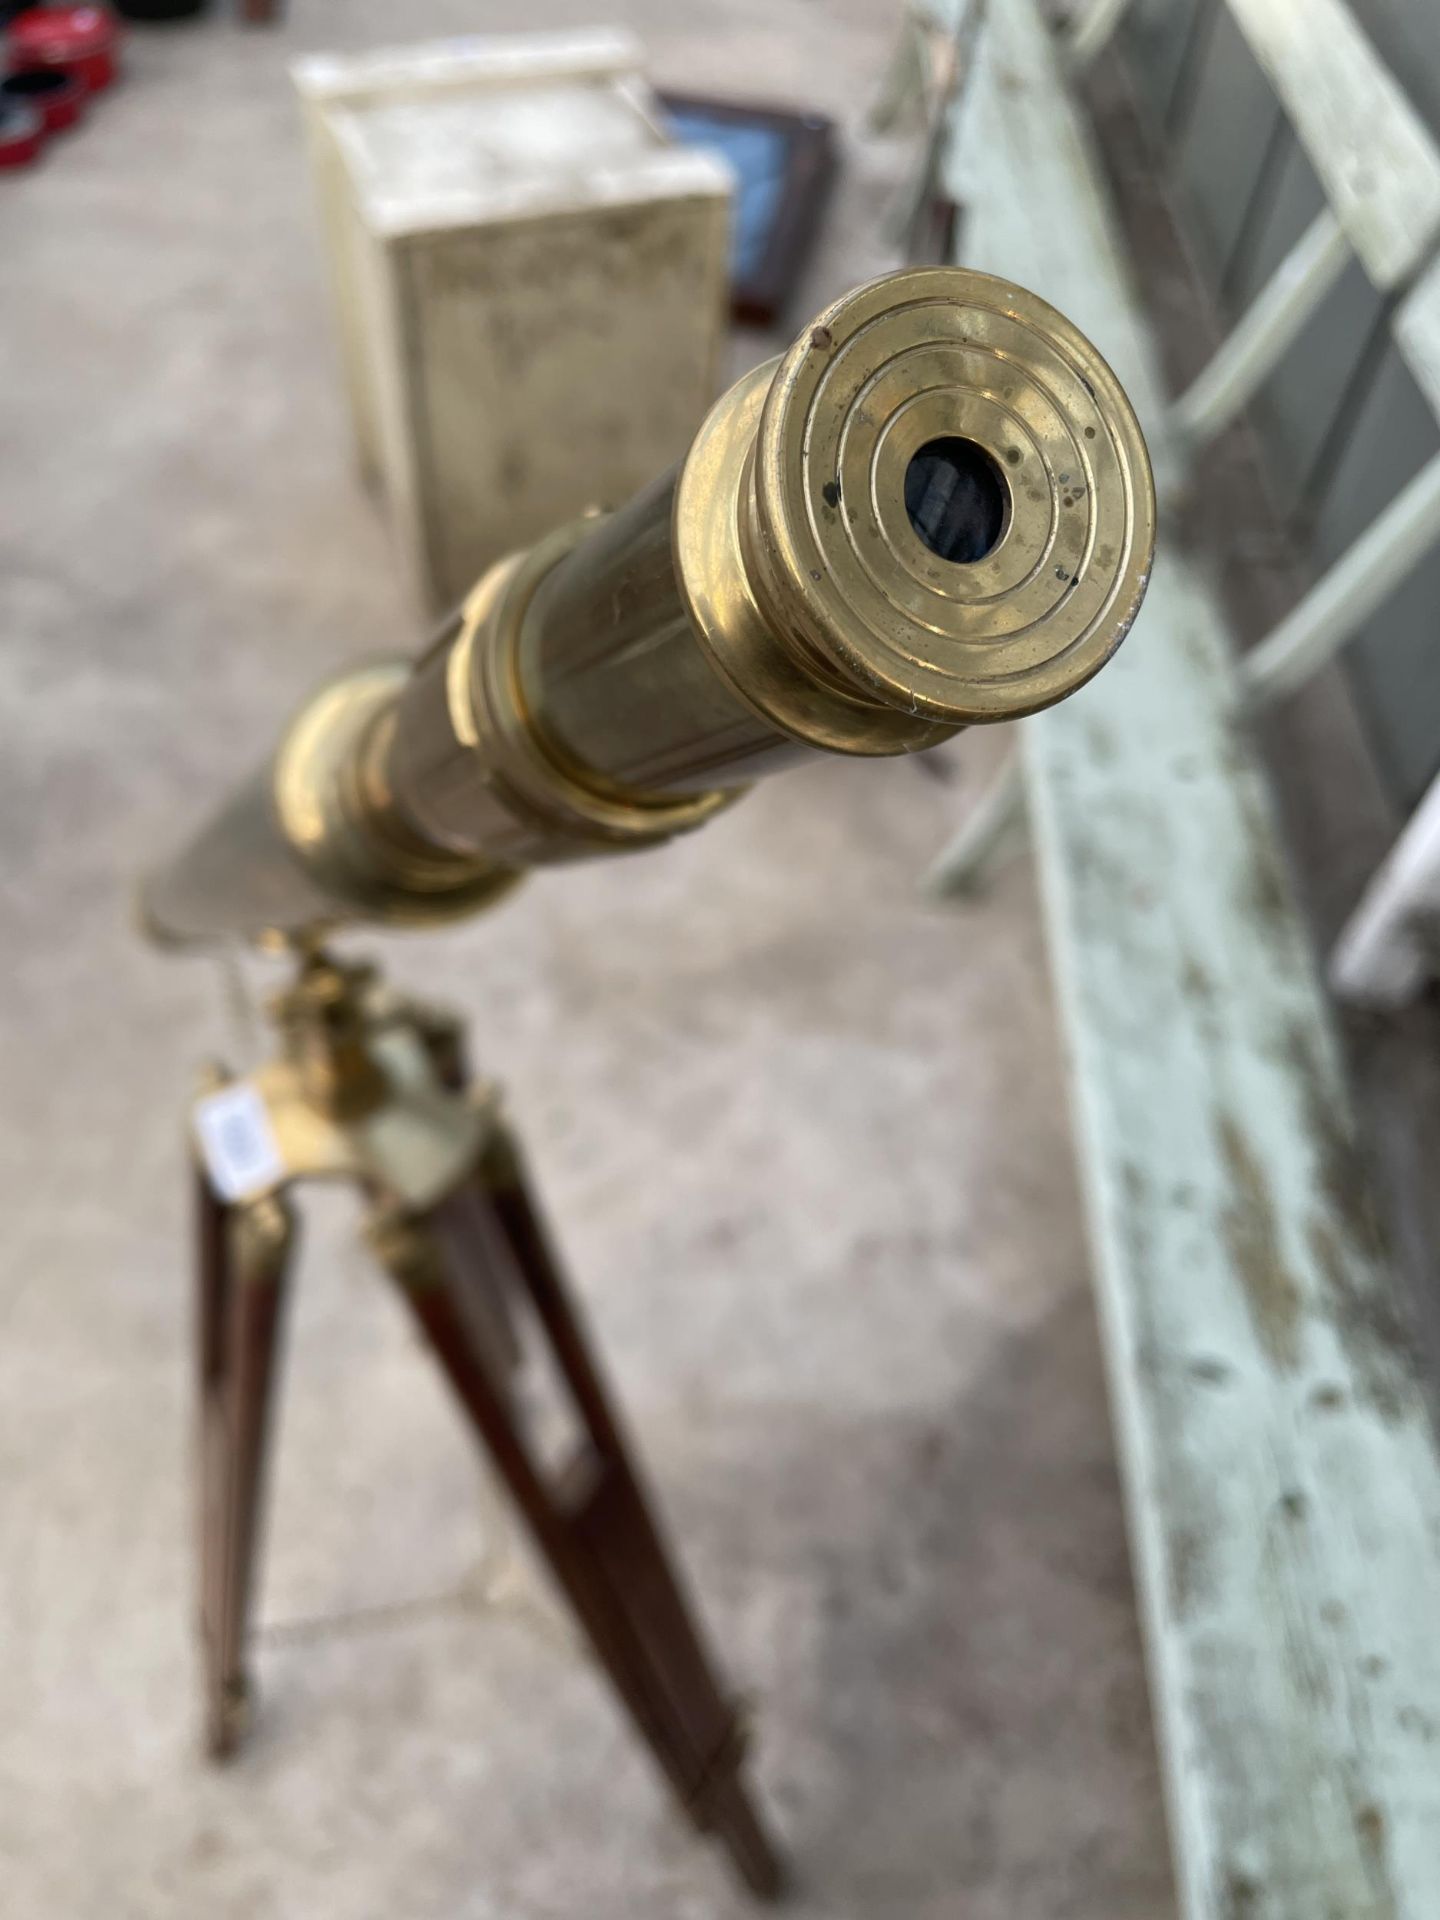 A VINTAGE BRASS TELESCOPE WITH WOODEN TRIPOD STAND - Image 4 of 7